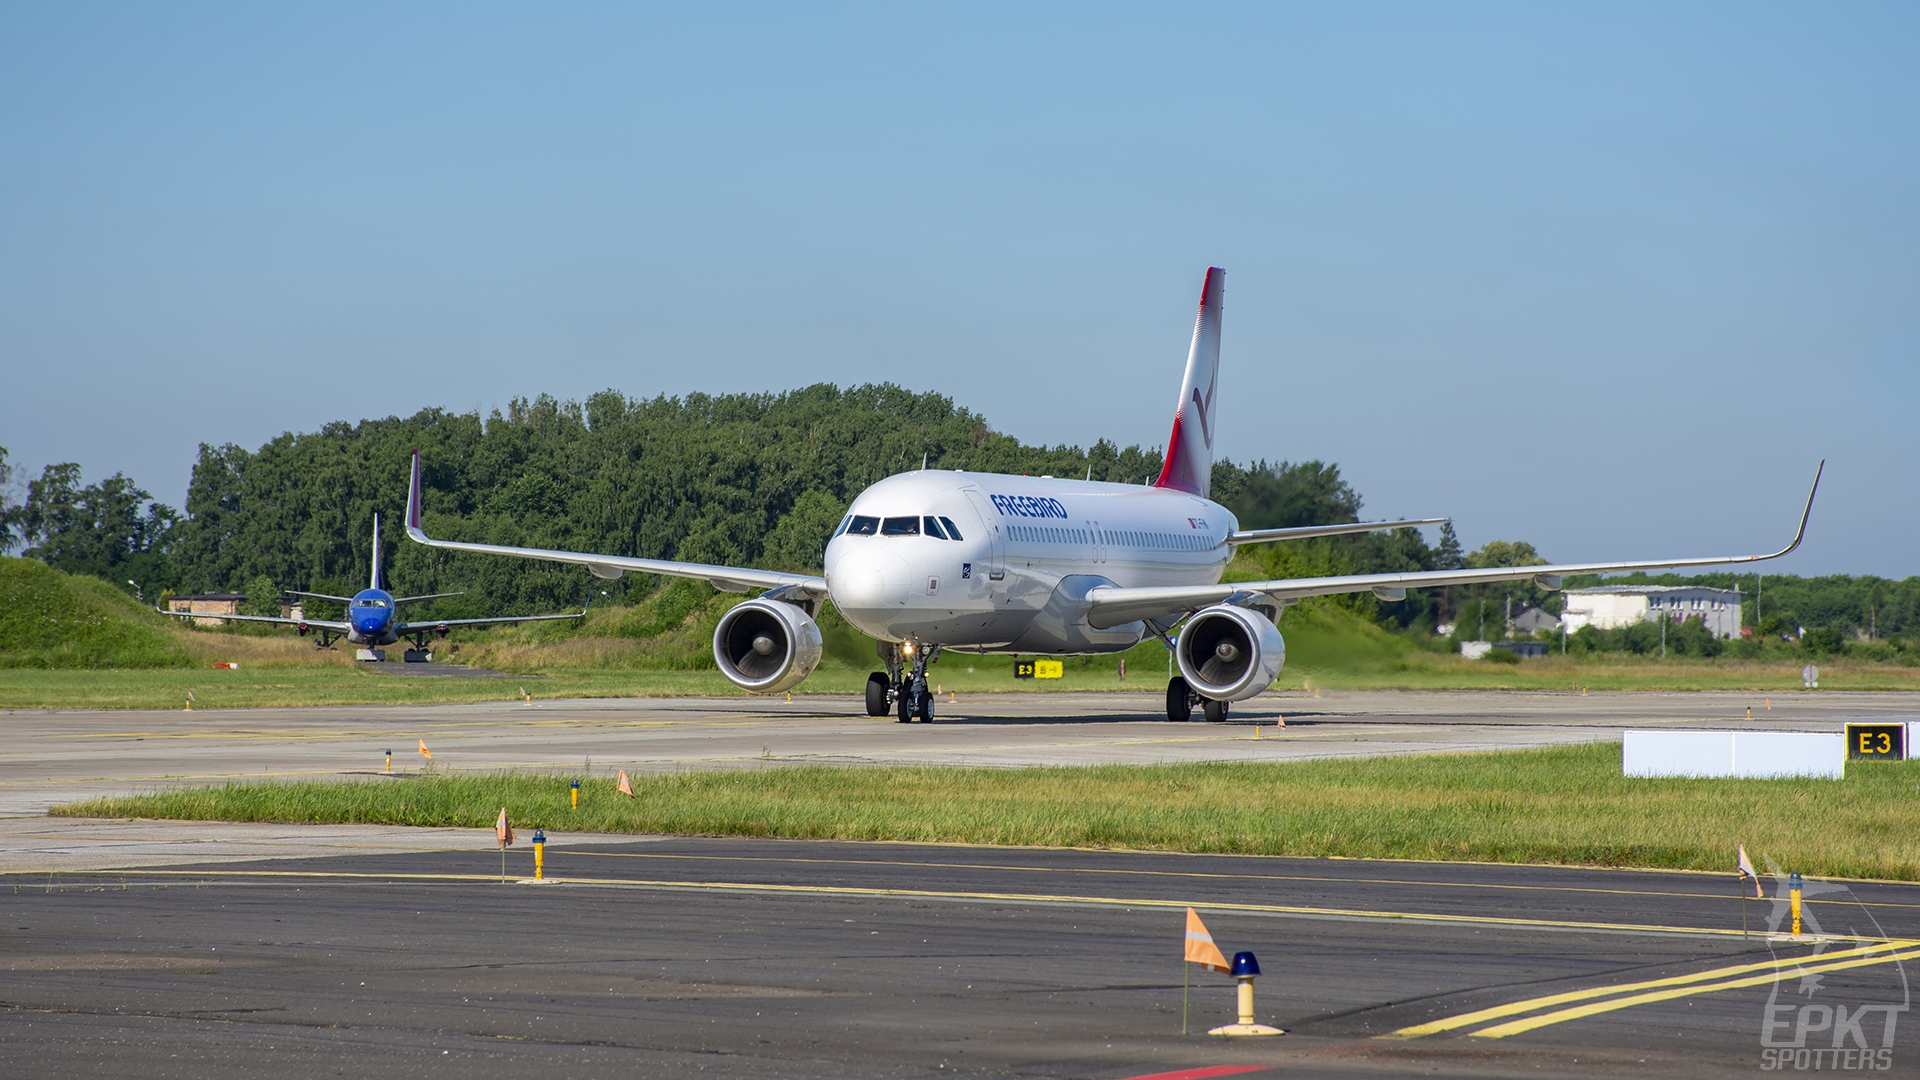 TC-FHN - Airbus A320 -214(WL) (Freebird Airlines) / Pyrzowice - Katowice Poland [EPKT/KTW]